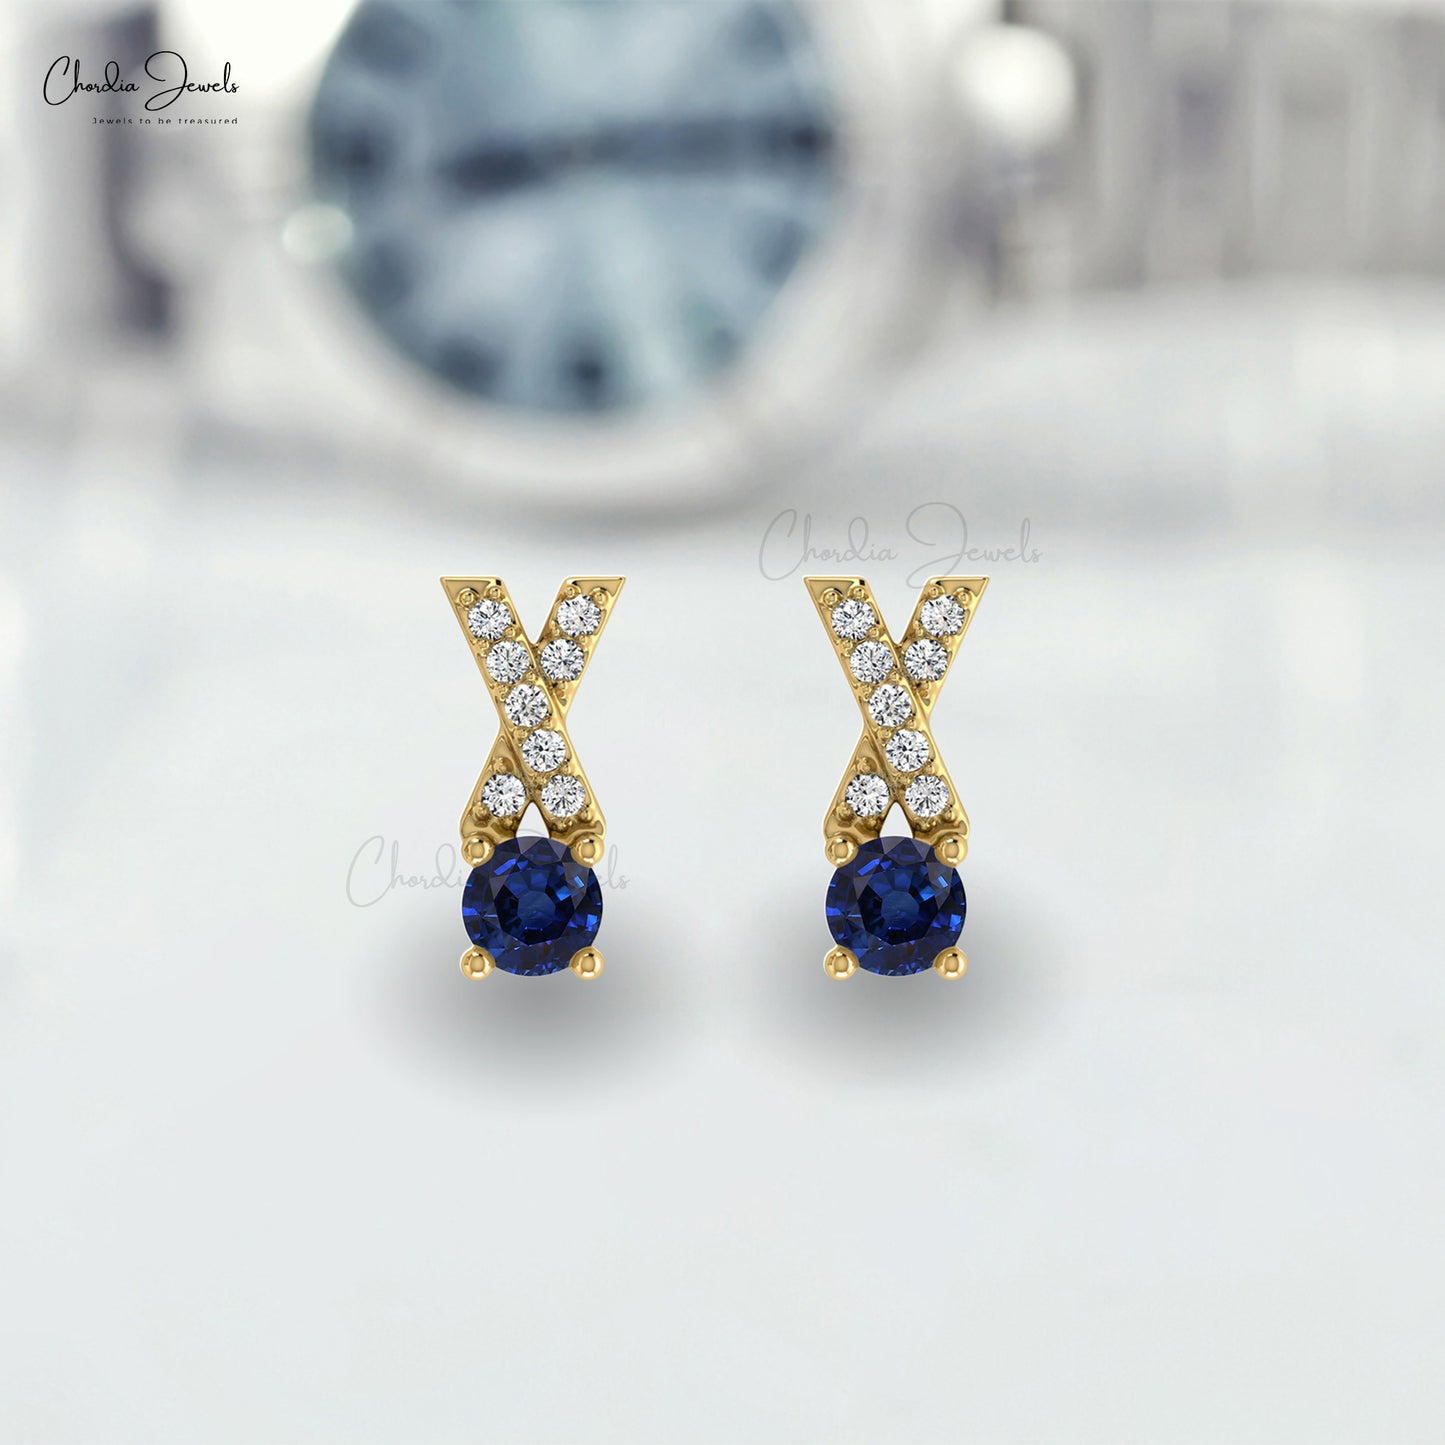 Excellent Prong Set AAA Blue Sapphire Studs Earring 0.90 Carat Round Cut Handmade Gemstone Earring In 14k Solid Gold White Diamond Studs For Women